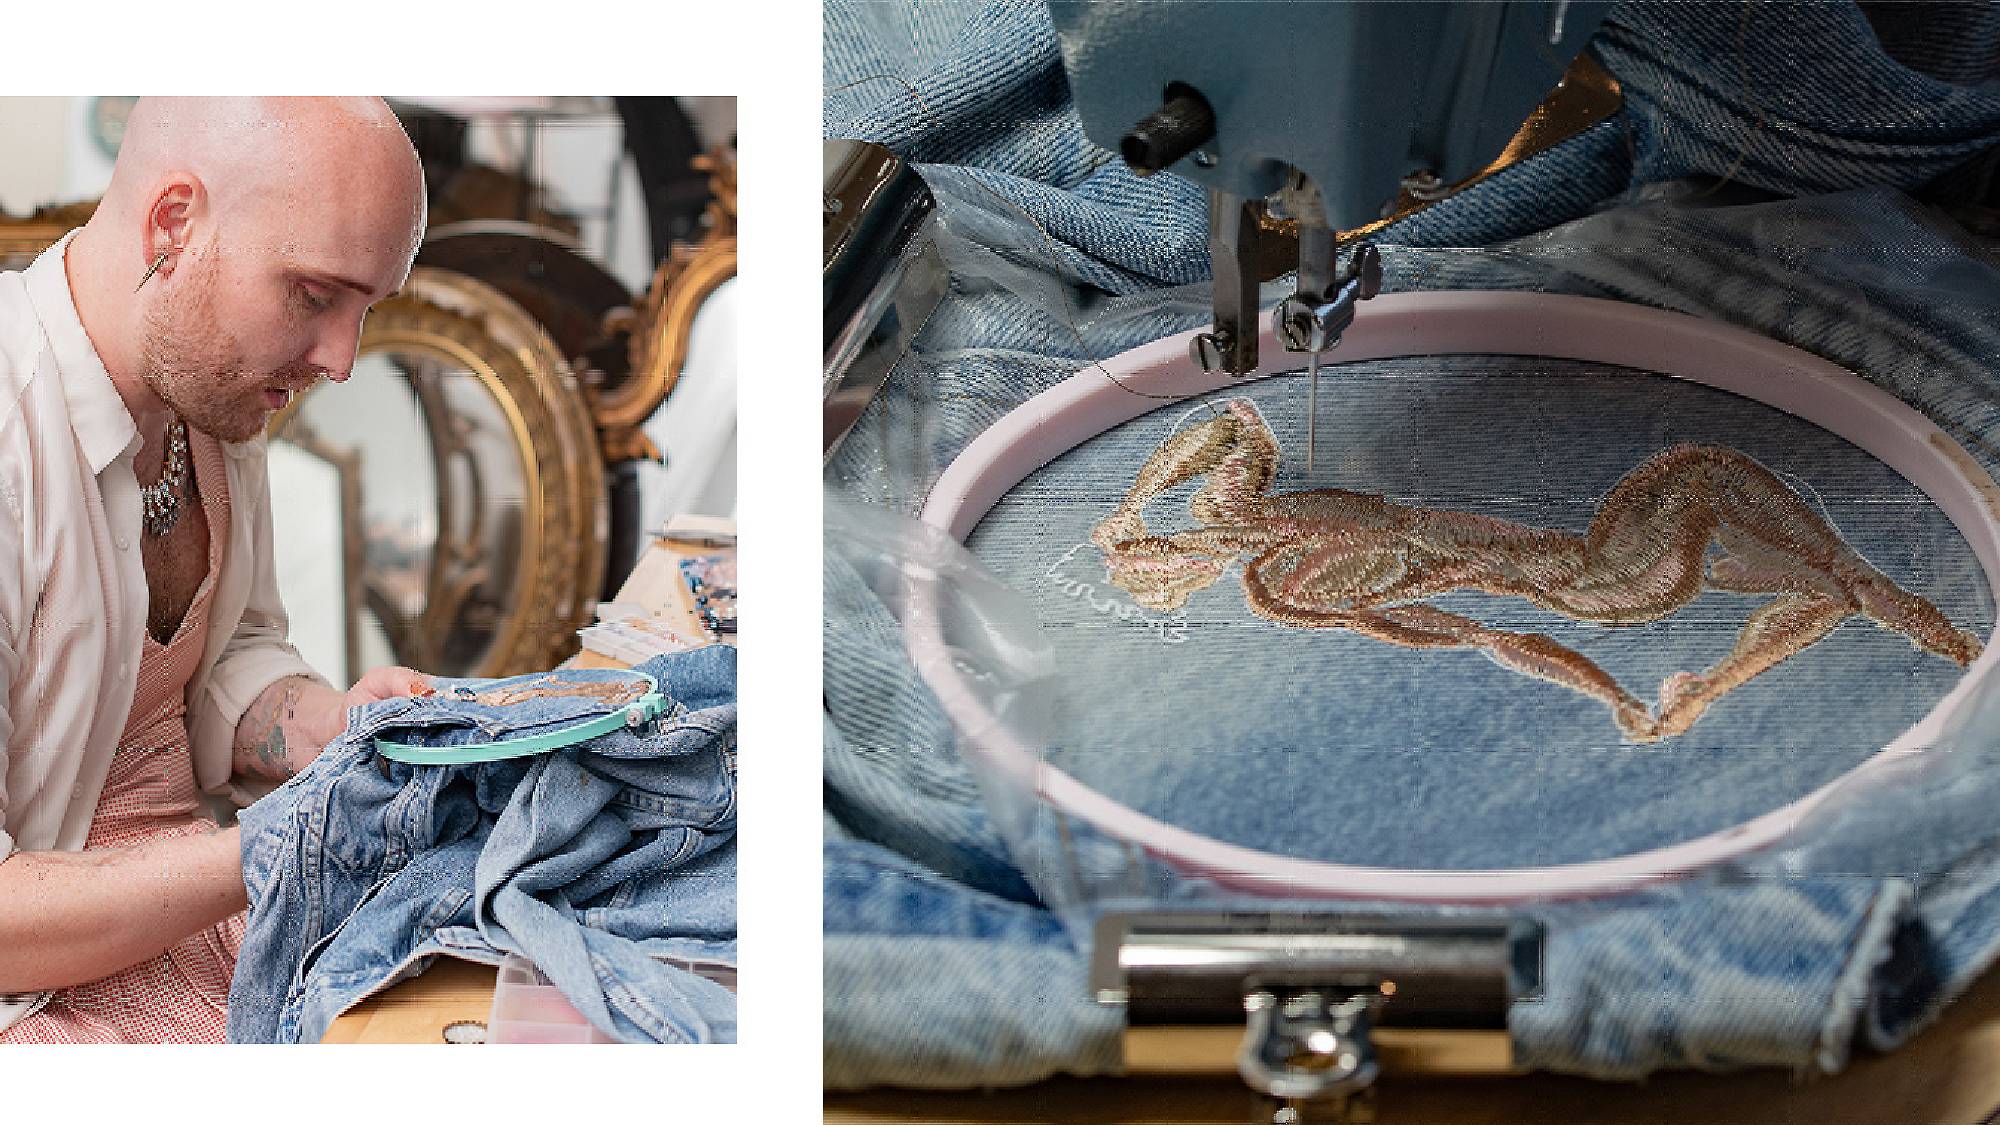 Two images - the left image is of Michael-Birch Pierce hand-stitching the embroidered design on a trucker jacket. The right image is of a sewing machine sewing a pattern on a trucker jacket.